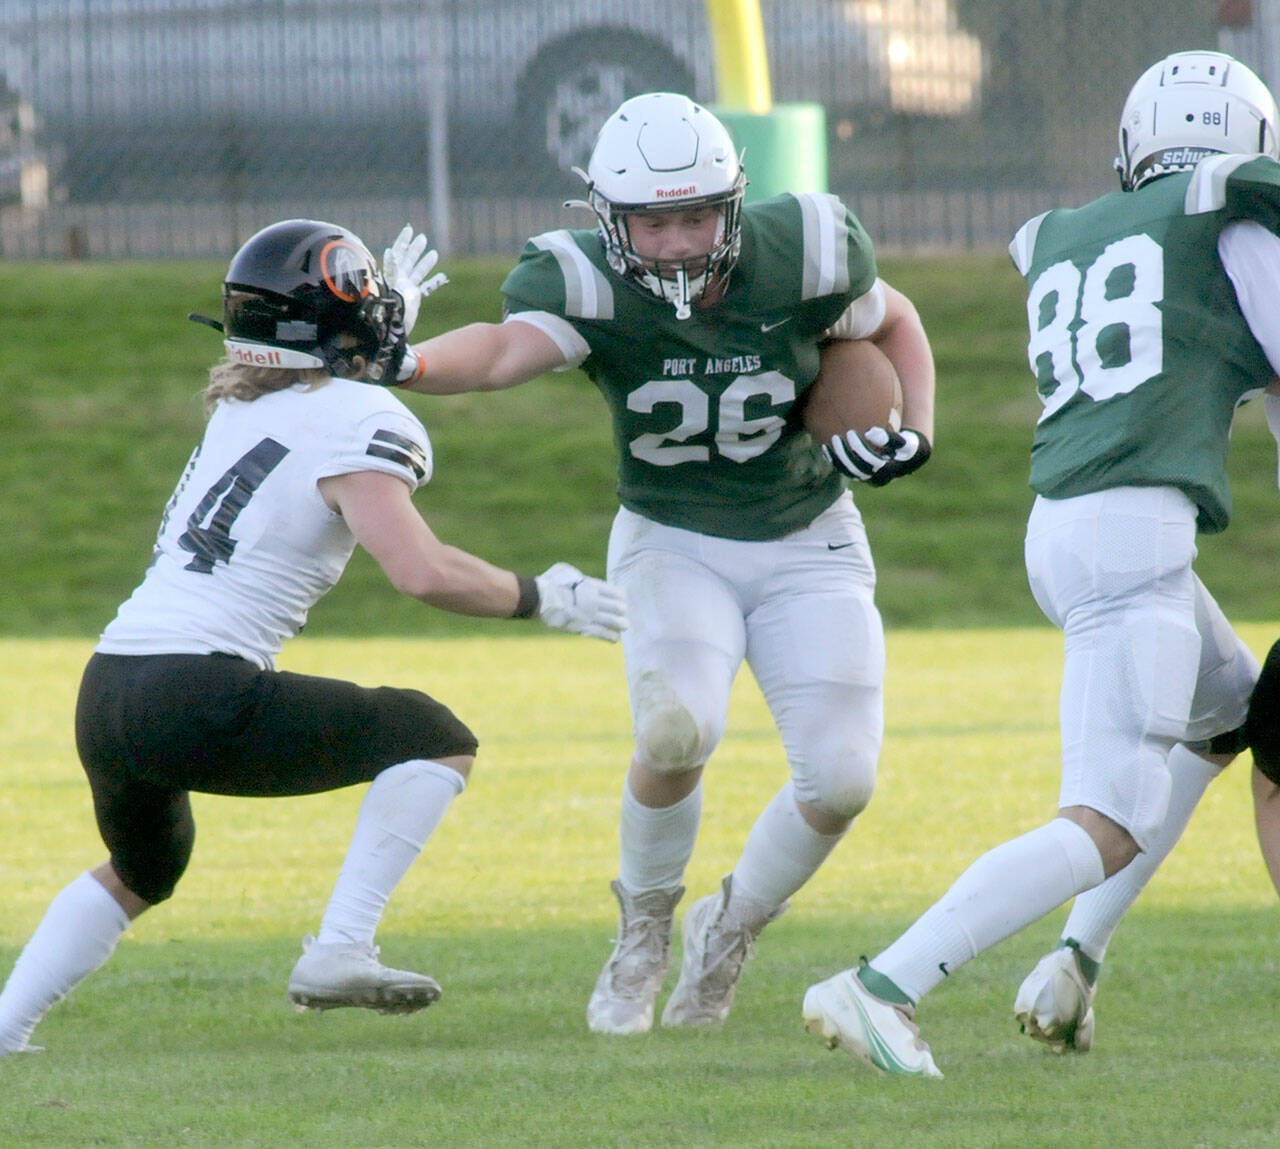 Port Angeles’ Landyn Jones, center, pushes off a Blaine defender after receiving a block from teammate Cole Beeman, right, on Friday in Port Angeles. Jones gained 82 yards rushing last week, much of it on misdirection plays. (Keith Thorpe/Peninsula Daily News)